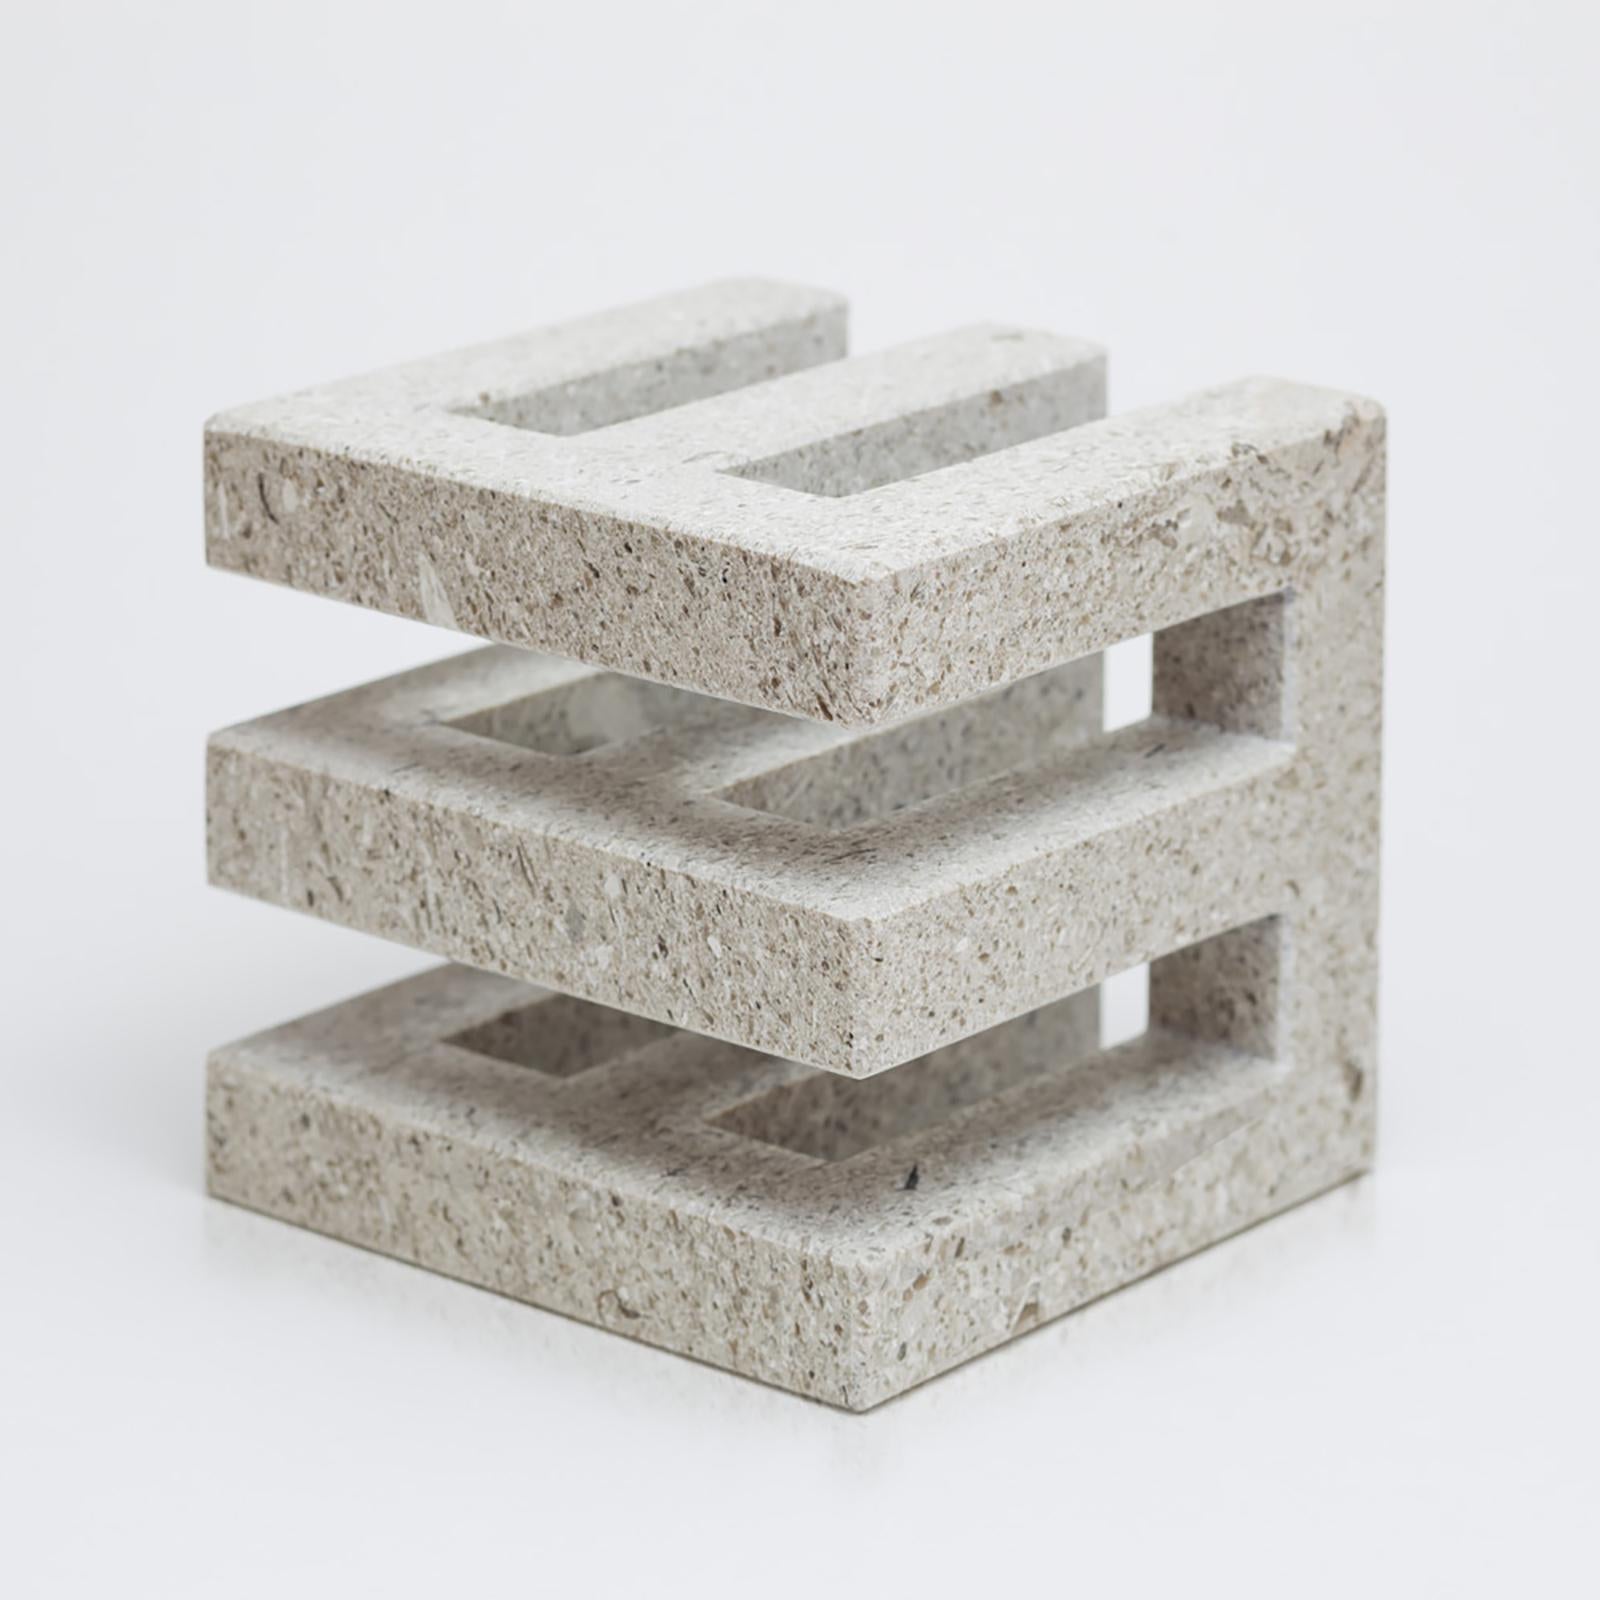 Hierón is an evocative object that takes us back to the glorious past of the ancient city of Poseidonia. This desk accessory is a desk holder made of local travertine, the material that was quarried in the area between Capodifiume and the sea in the